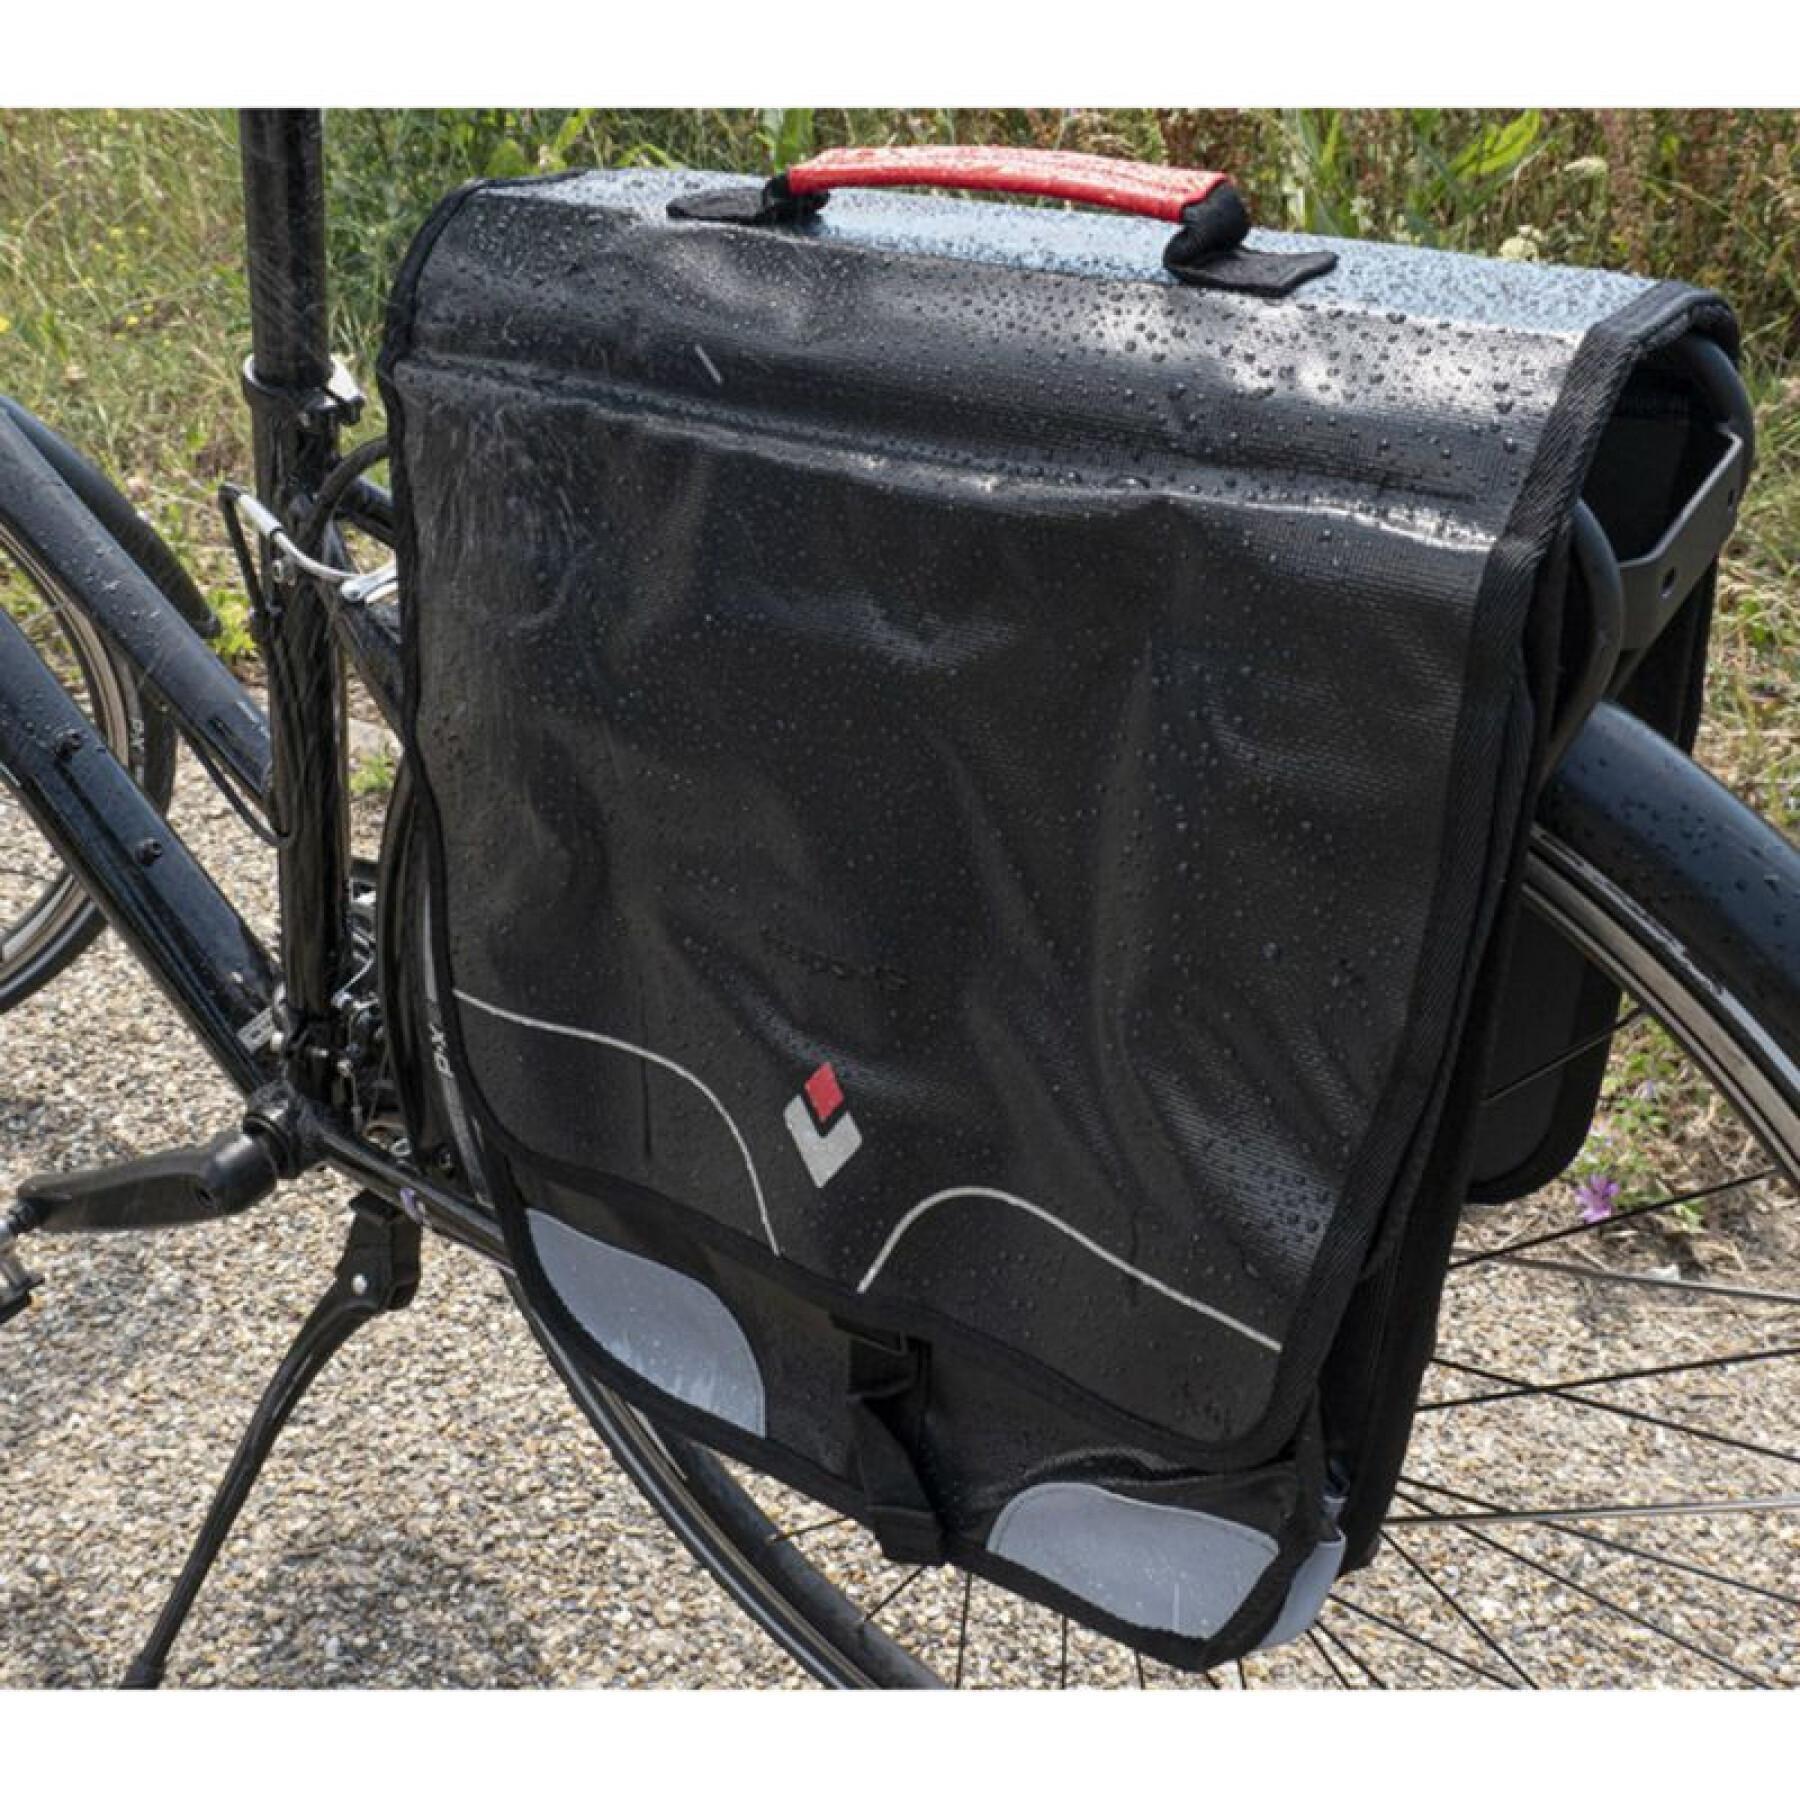 Waterproof double rigid bicycle rear bag with velcro fastening on luggage rack P2R Hapo-G